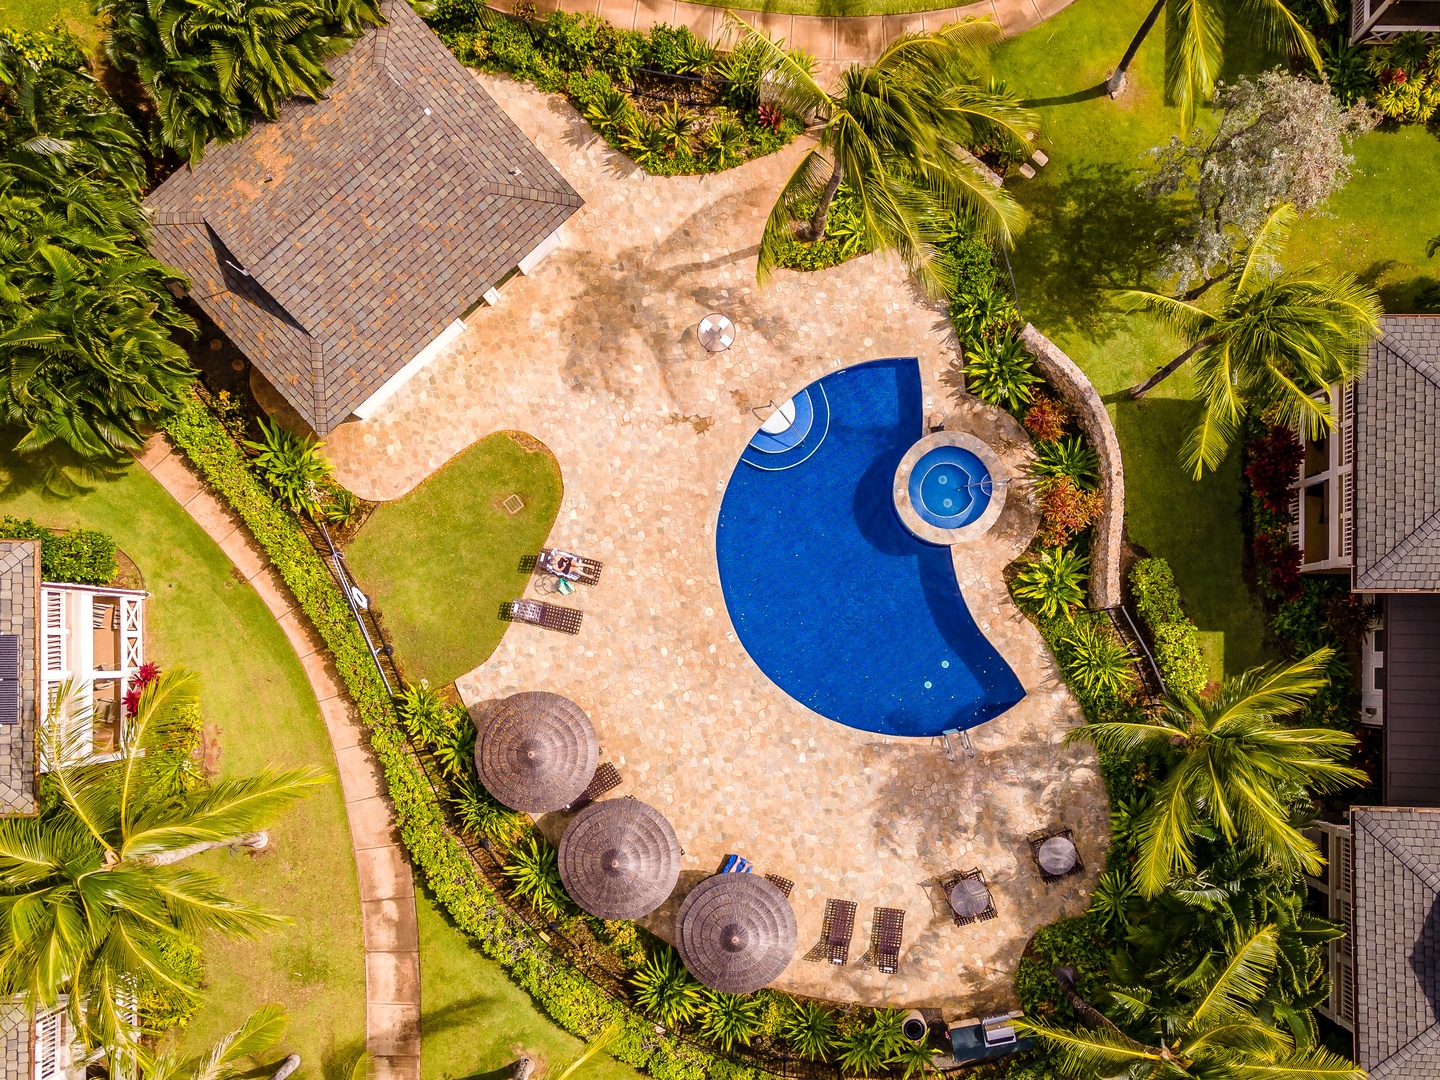 Kapolei Vacation Rentals, Coconut Plantation 1208-2 - An overhead view of one of the pools at the resort.